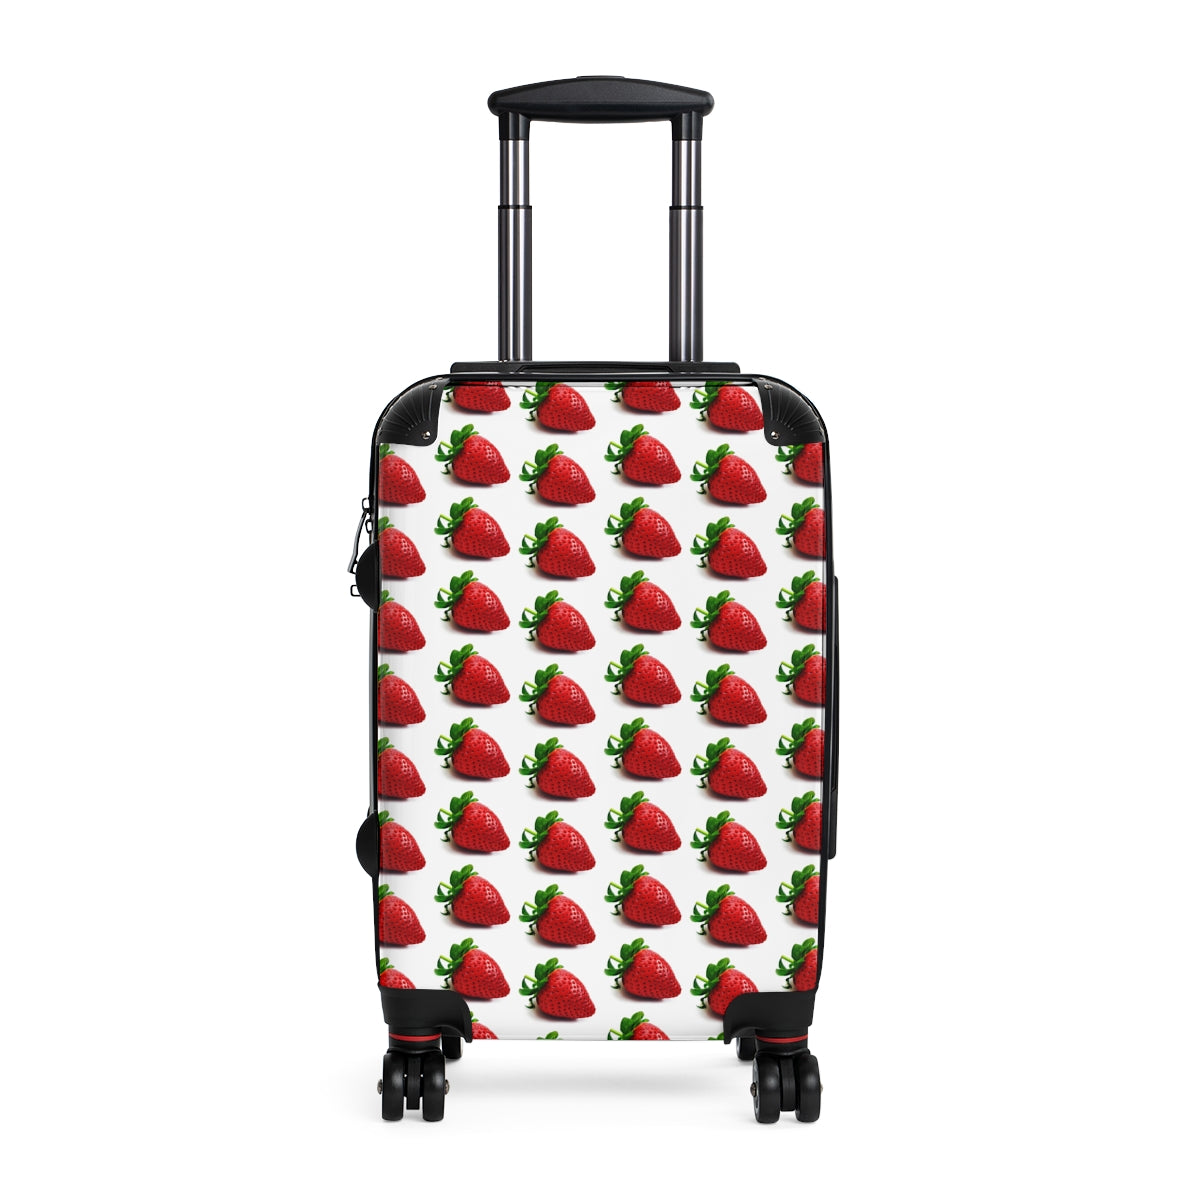 Getrott Strawberry Fruit Pattern Cabin Suitcase Inner Pockets Extended Storage Adjustable Telescopic Handle Inner Pockets Double wheeled Polycarbonate Hard-shell Built-in Lock